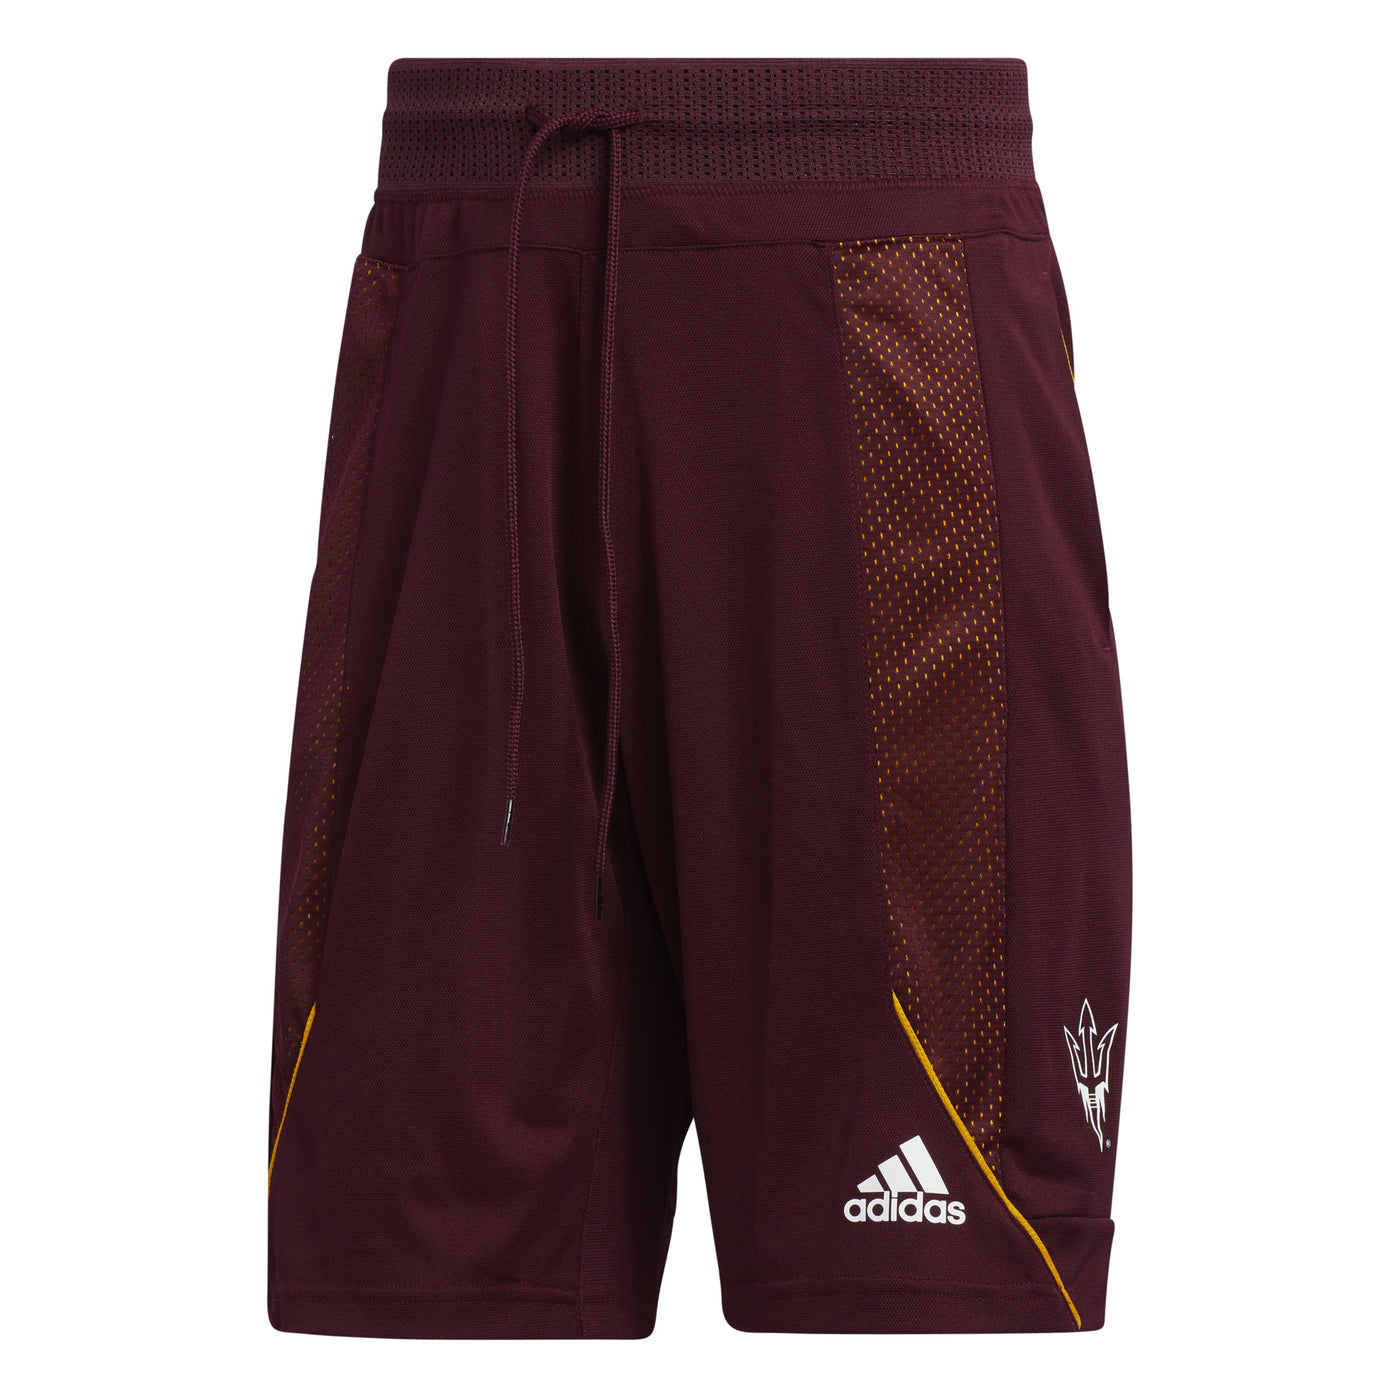 ASU maroon men's Adidas shorts with mesh panels and a pitchfork on the left leg